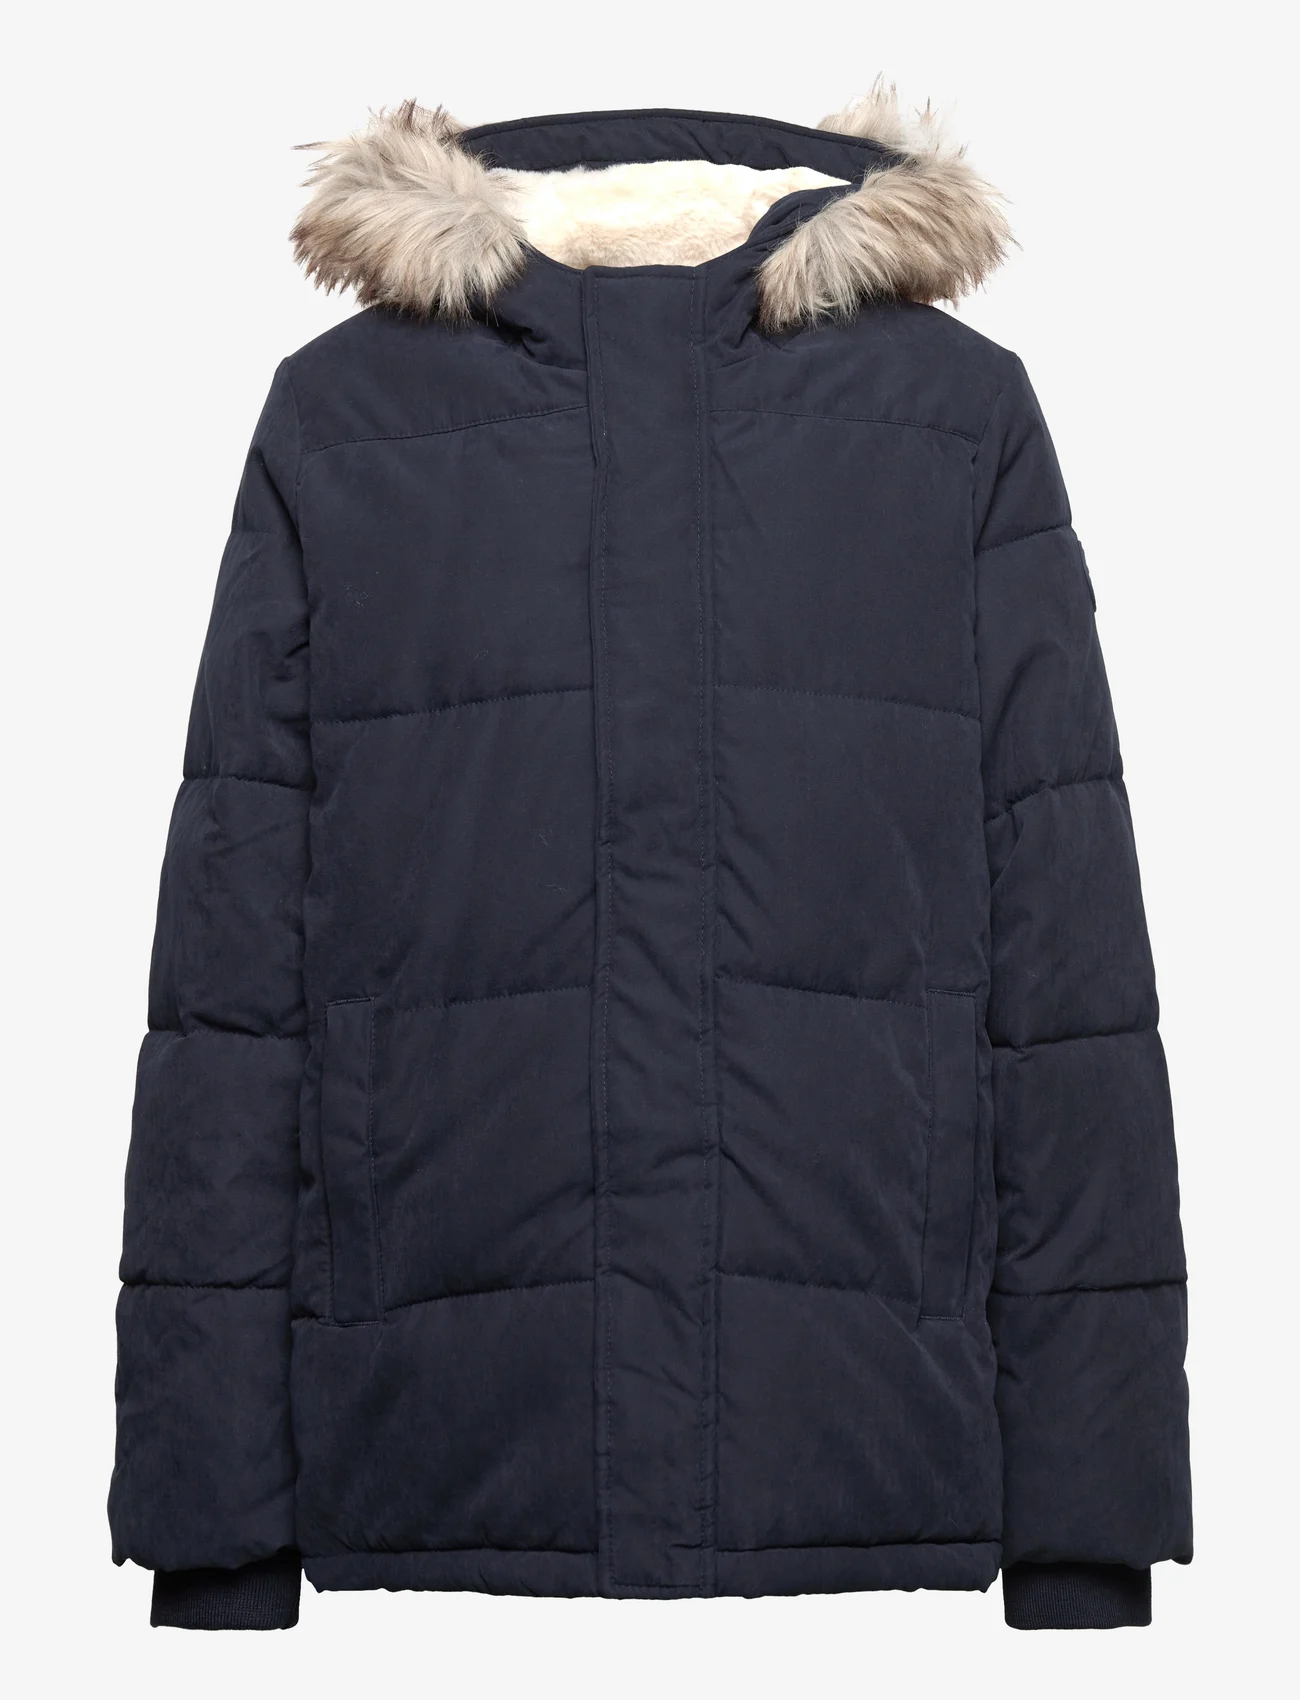 Abercrombie & Fitch - kids BOYS OUTERWEAR - parkad - navy - 0